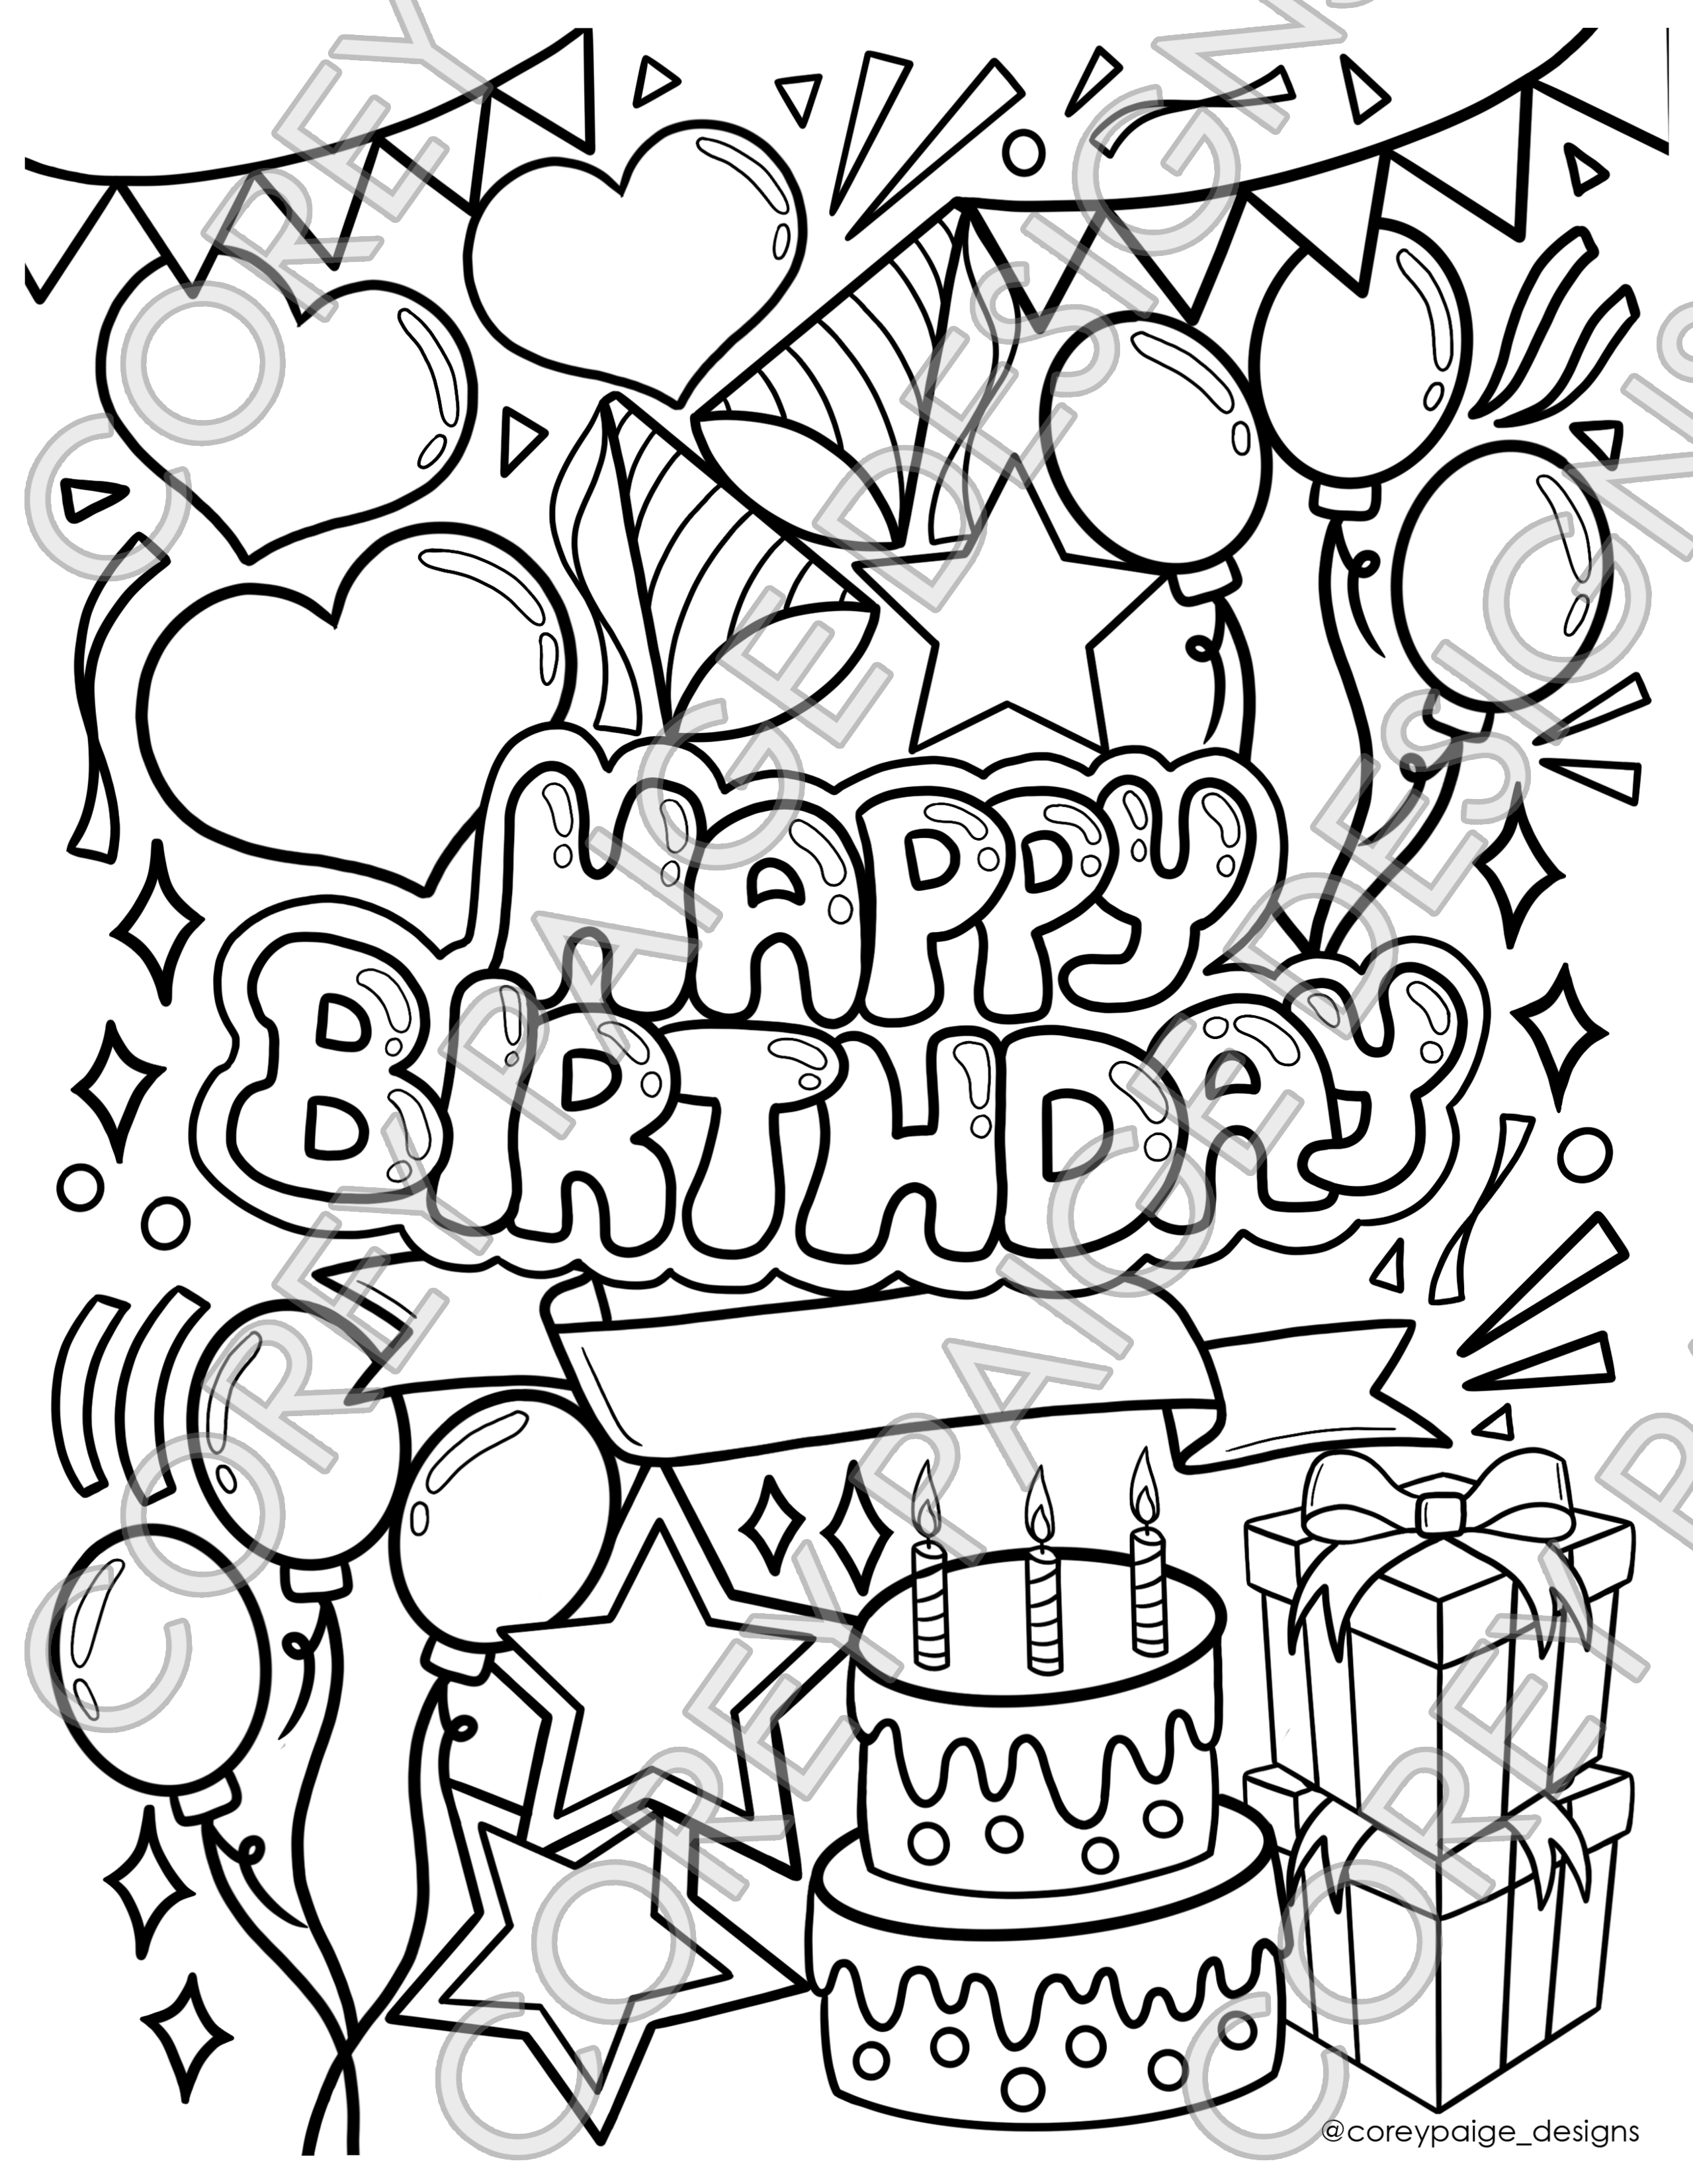 A Happy Birthday Coloring Pages / Happy Birthday Coloring Pages Free